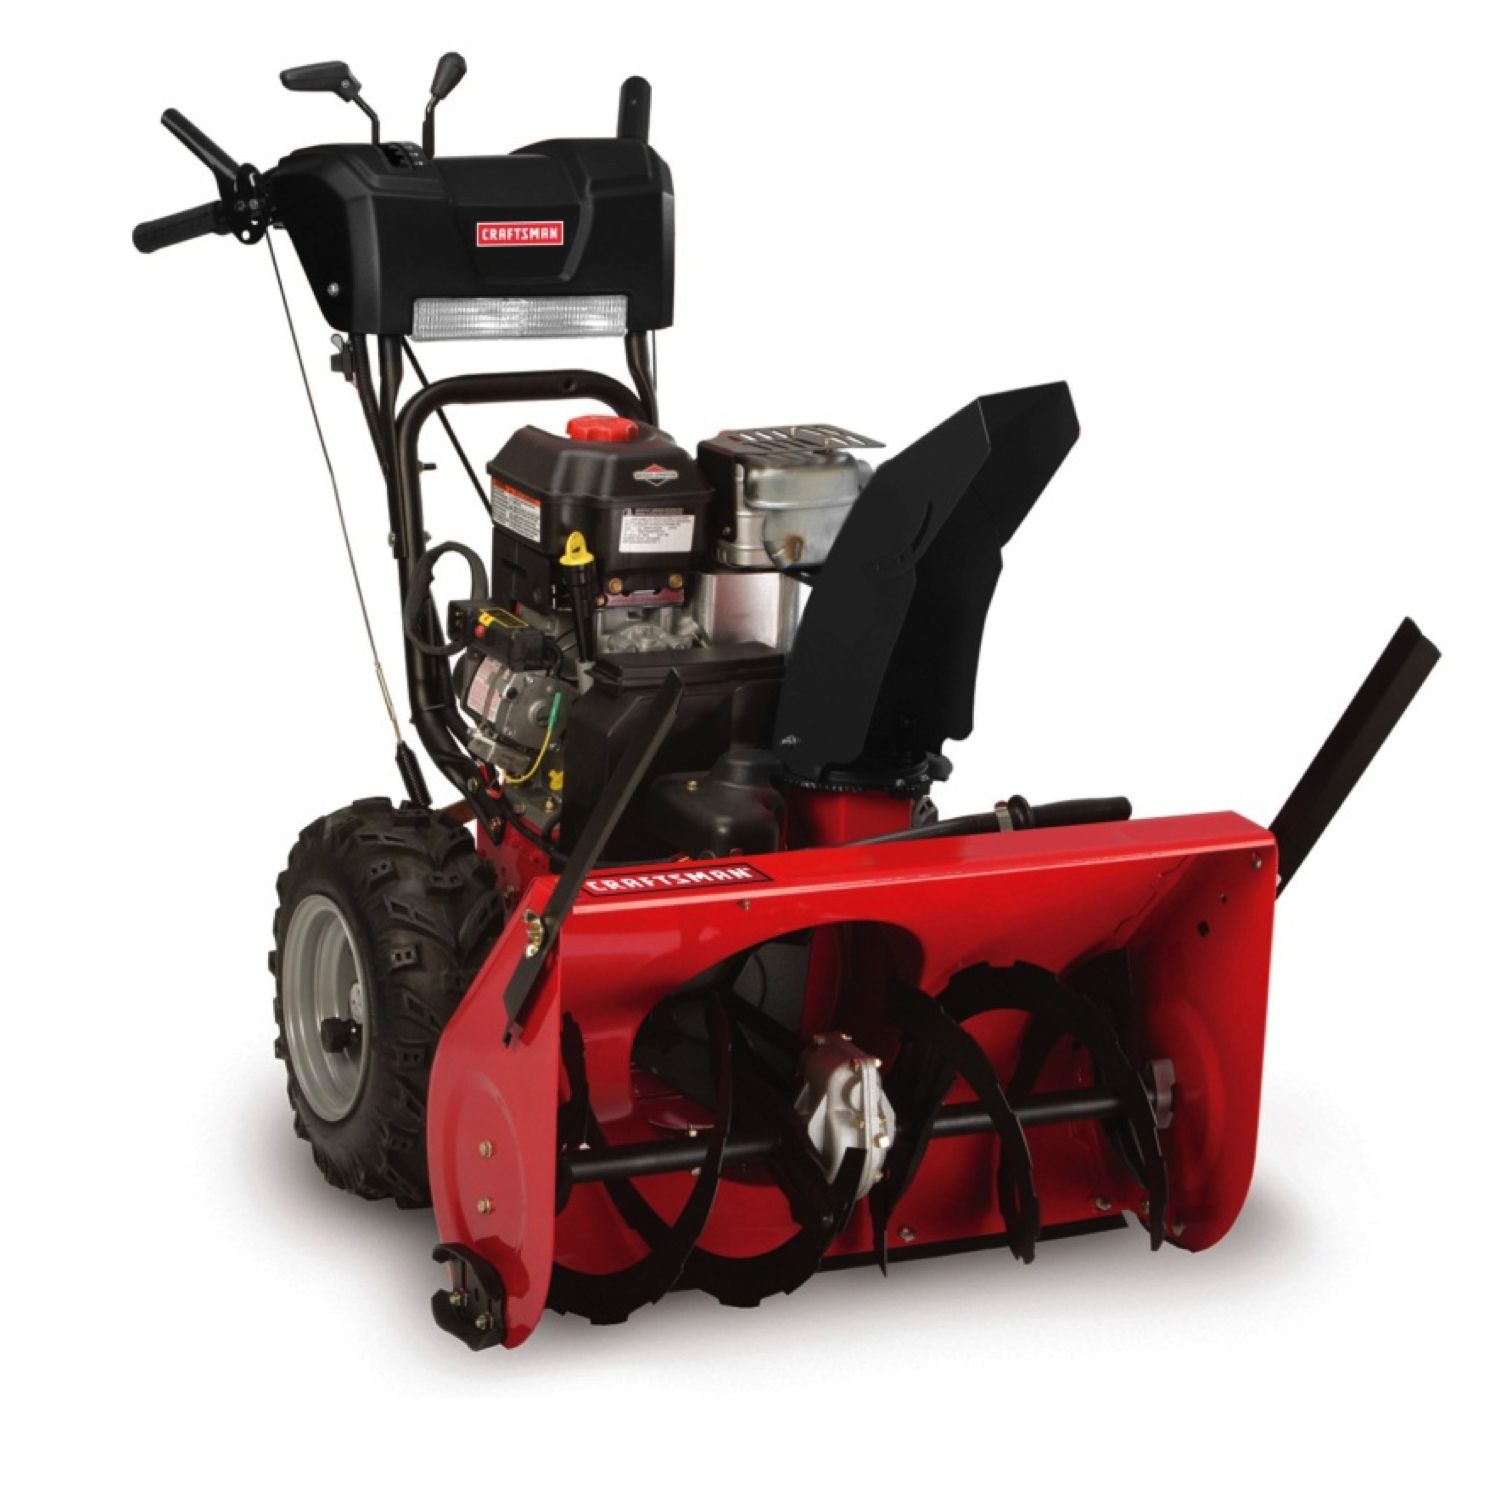 Craftsman 27" 205cc Two-Stage Snow Thrower | Shop Your Way: Online